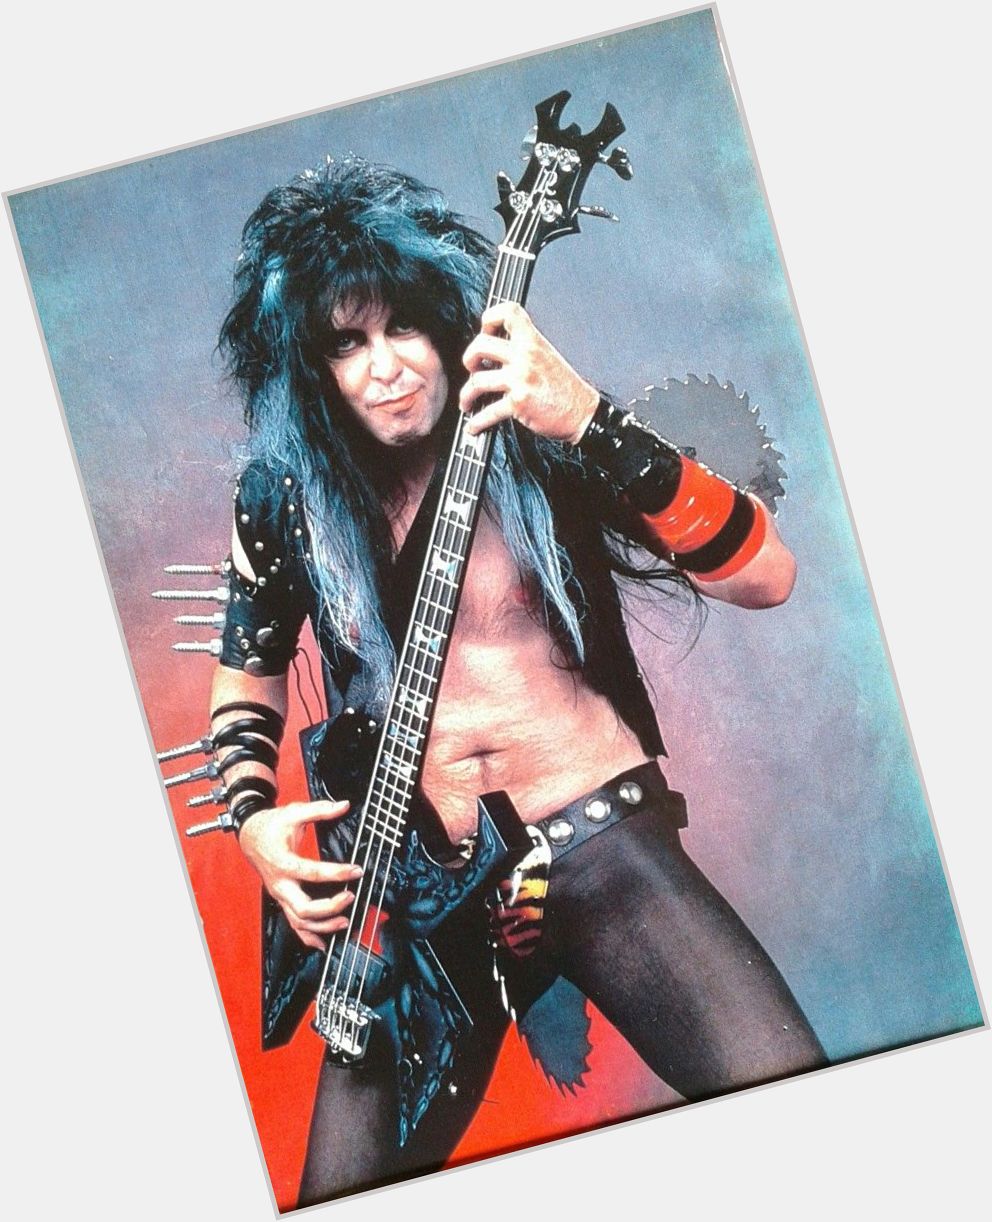 Happy Birthday to W.A.S.P. Singer/Guitarist Blackie Lawless. He turns 64 today. 